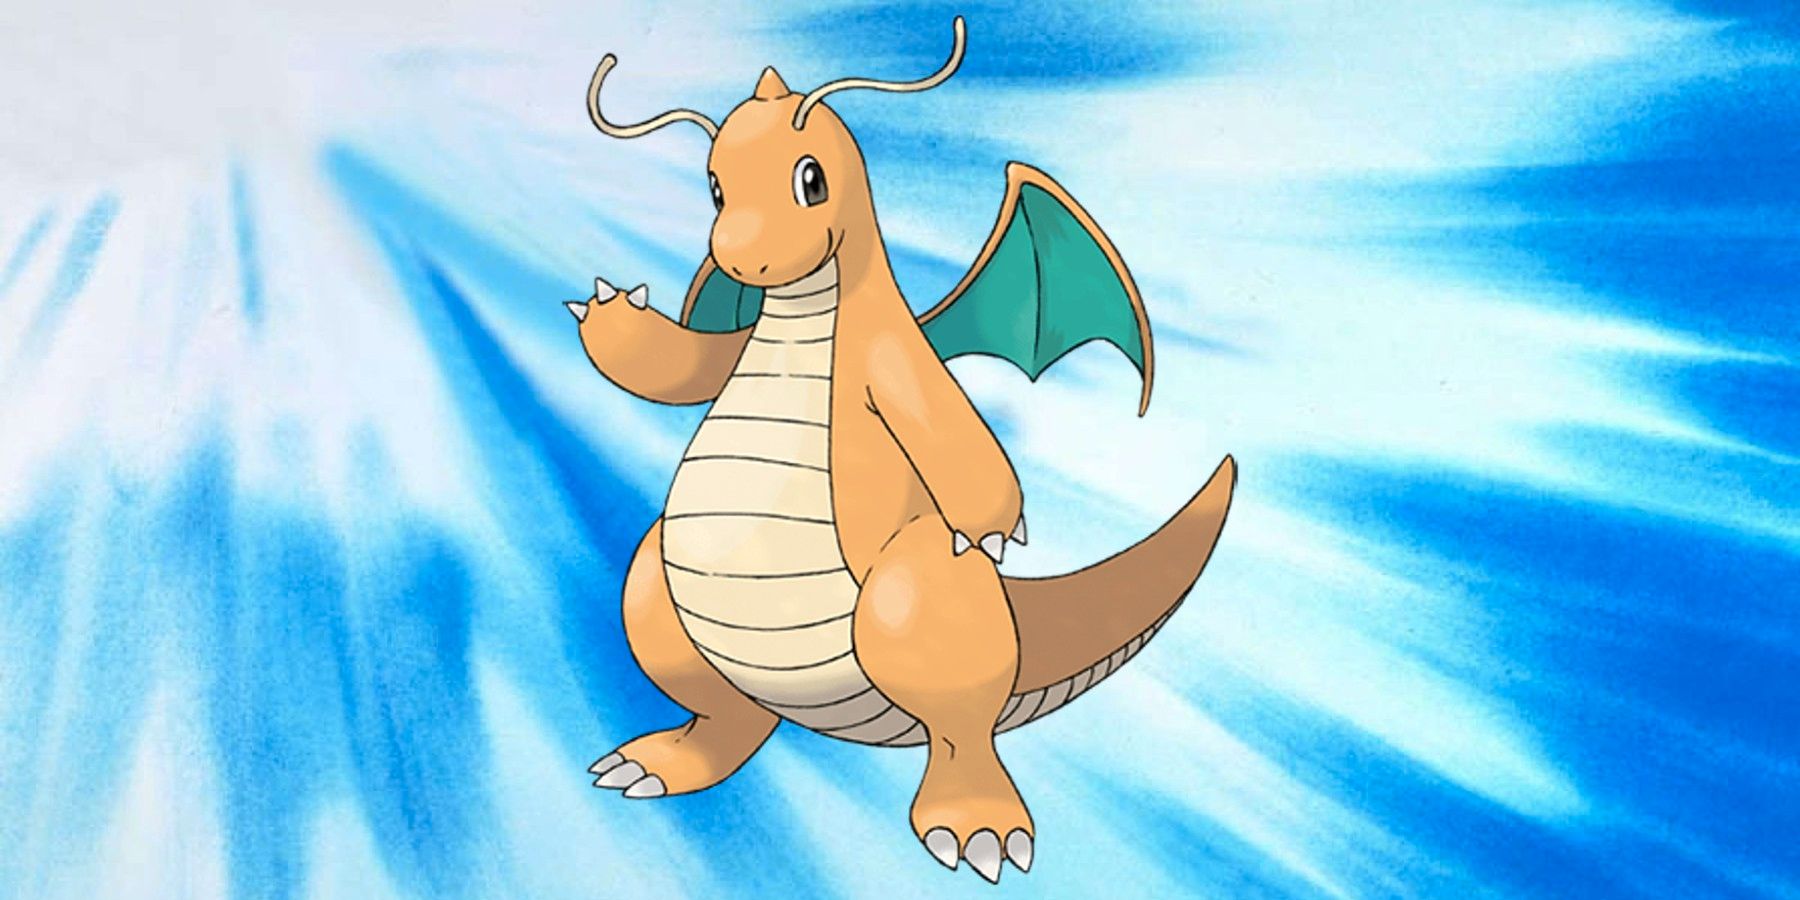 A Pokémon fan changes the color of Dragonite to make it more in line with Dragonair